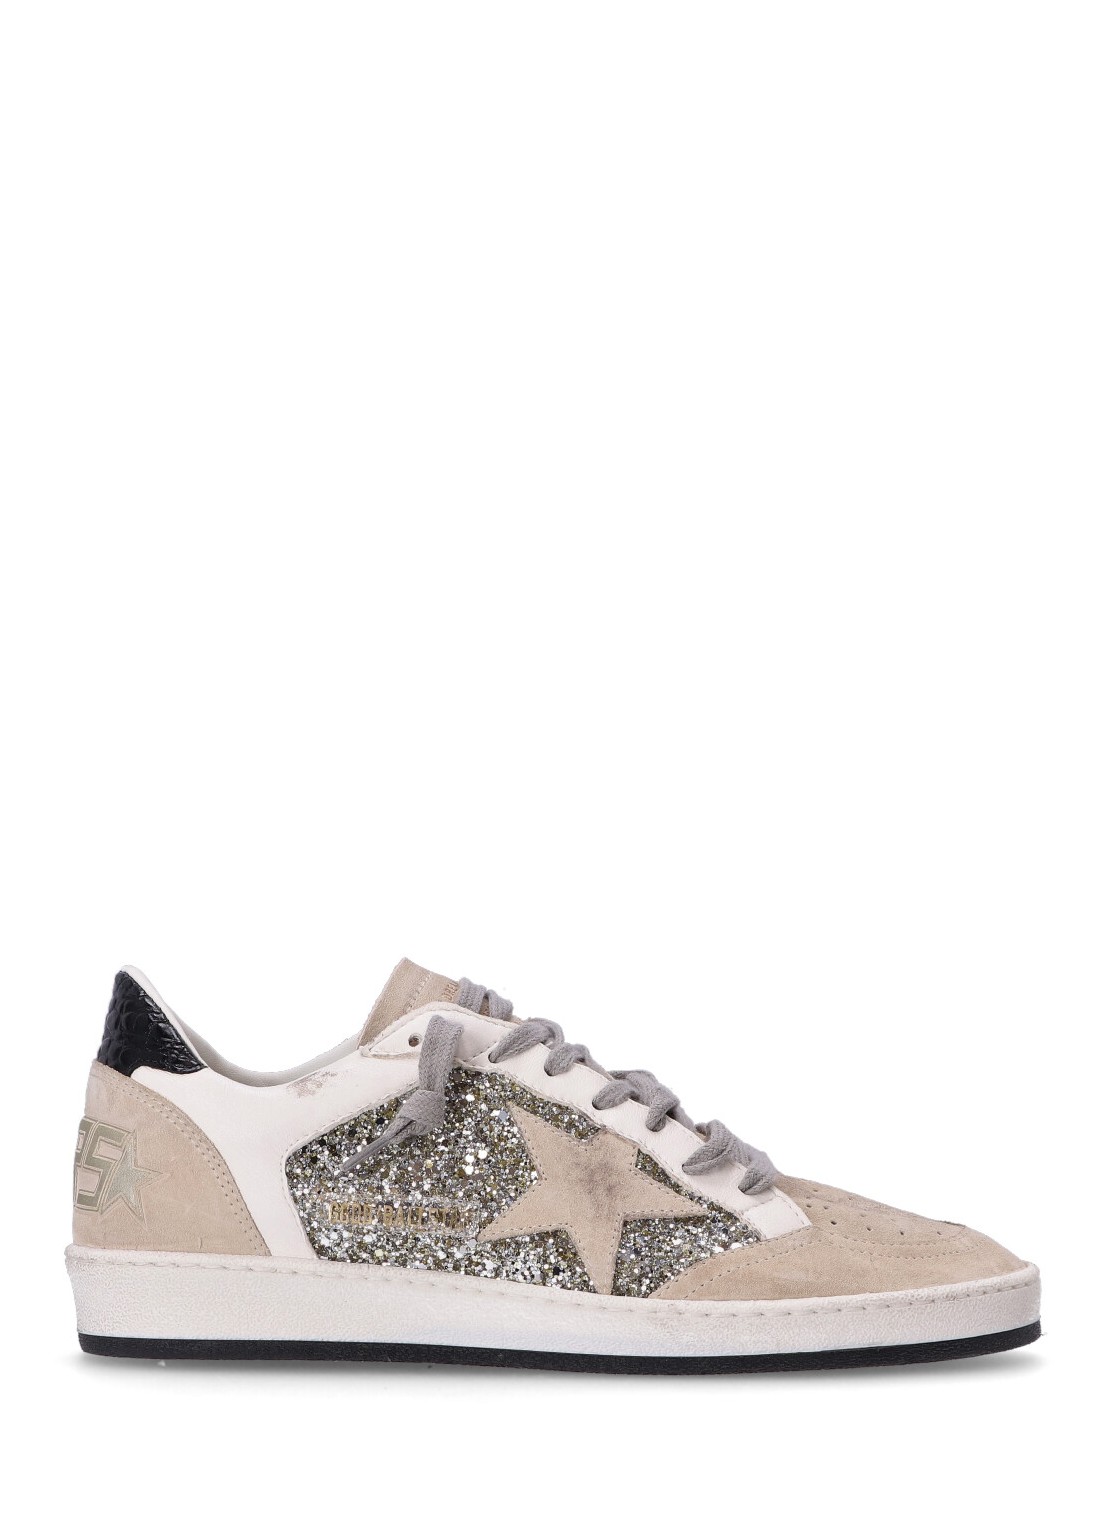 Sneaker golden goose sneaker woman ball star glitter and leather gwf00327f005430 70159 talla 41
 